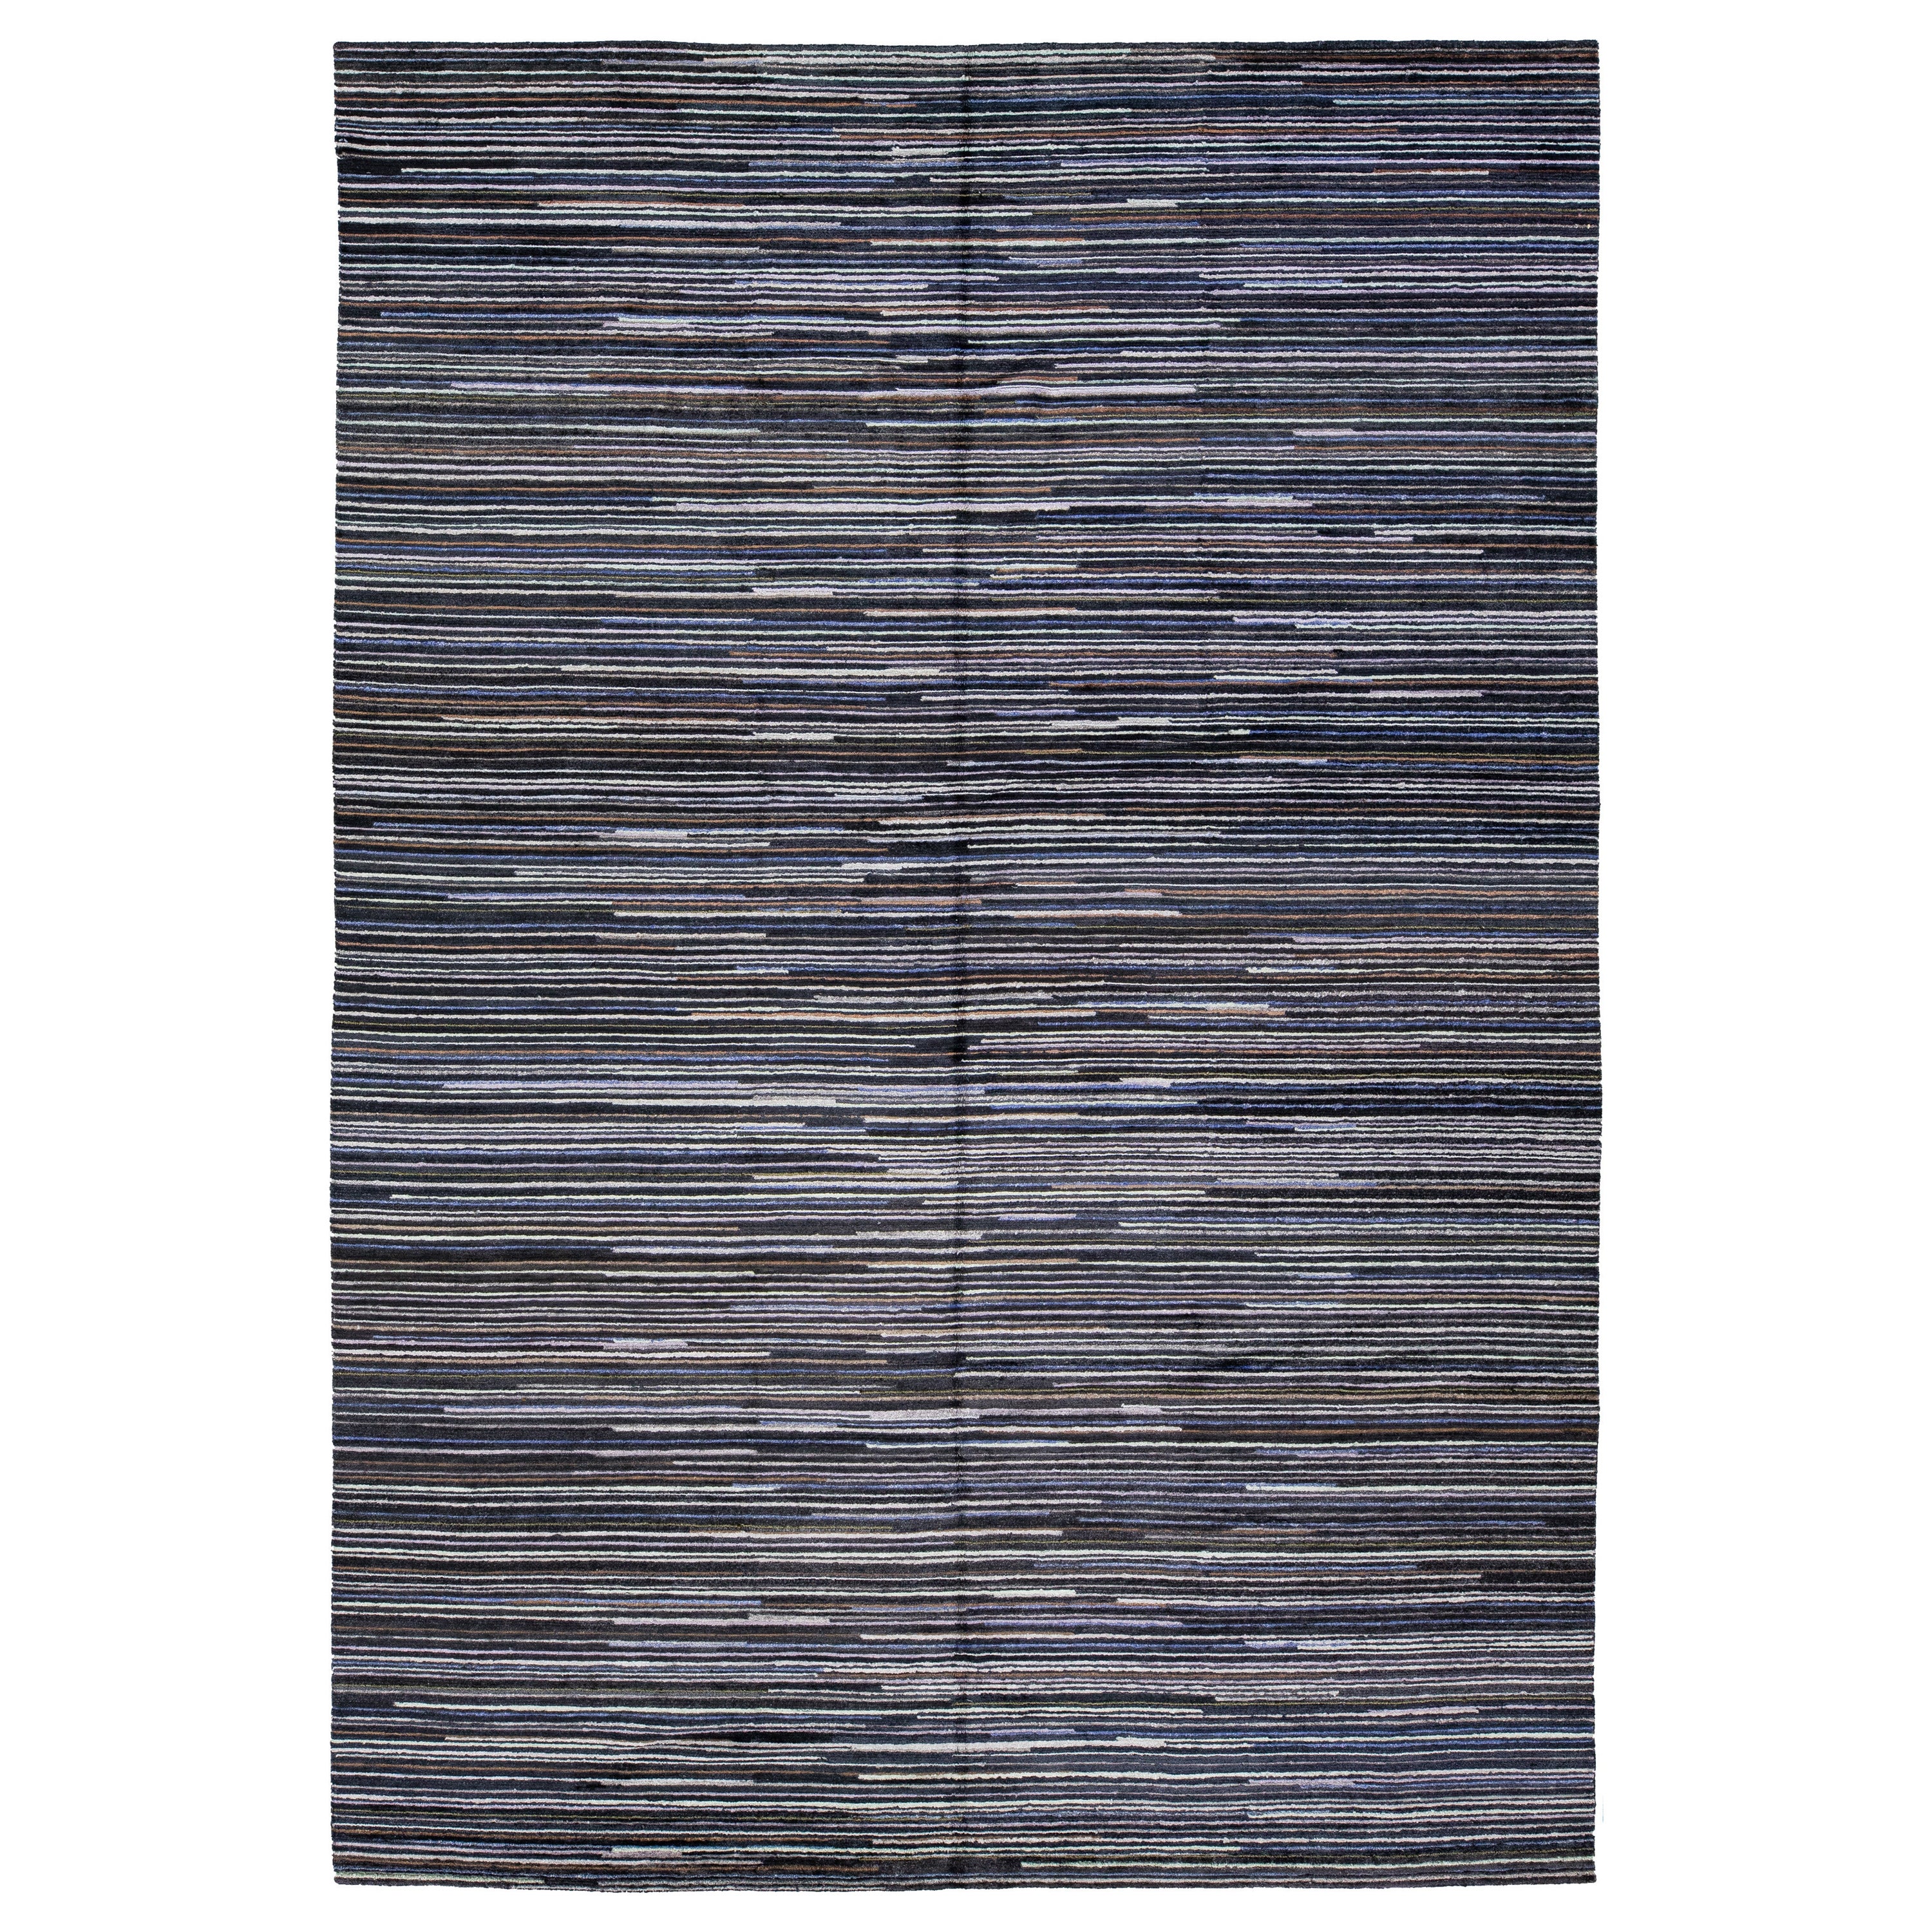 Black and Gray Modern Indian Wool Rug Features a Striped Design